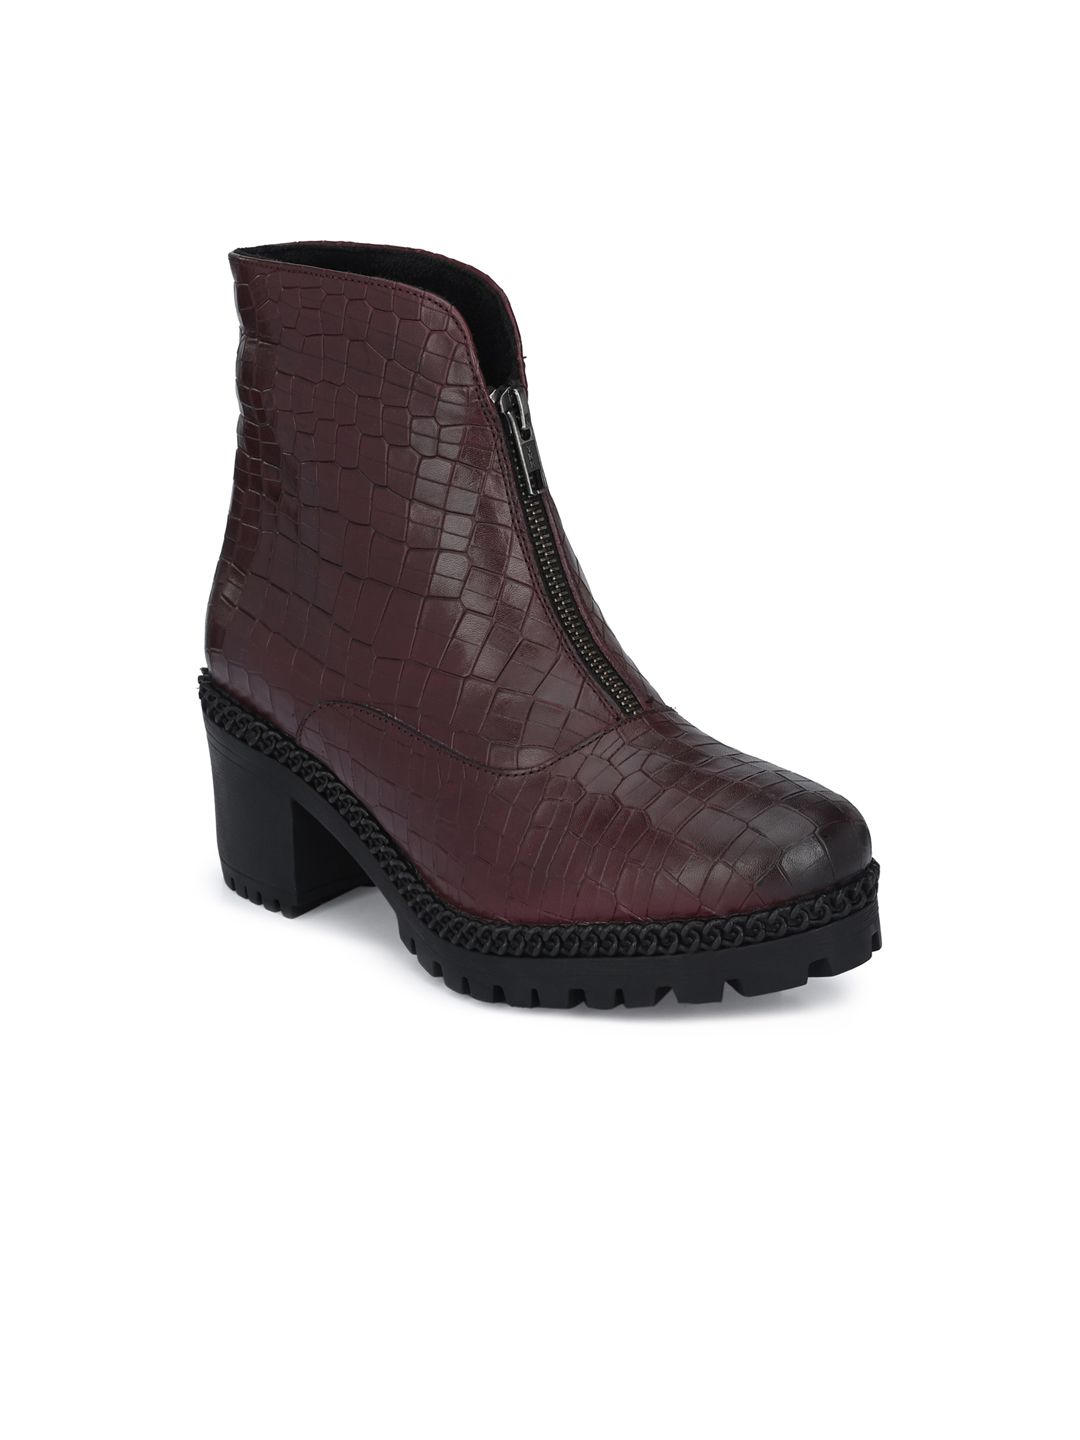 Delize Burgundy Printed Block Heeled Boots Price in India